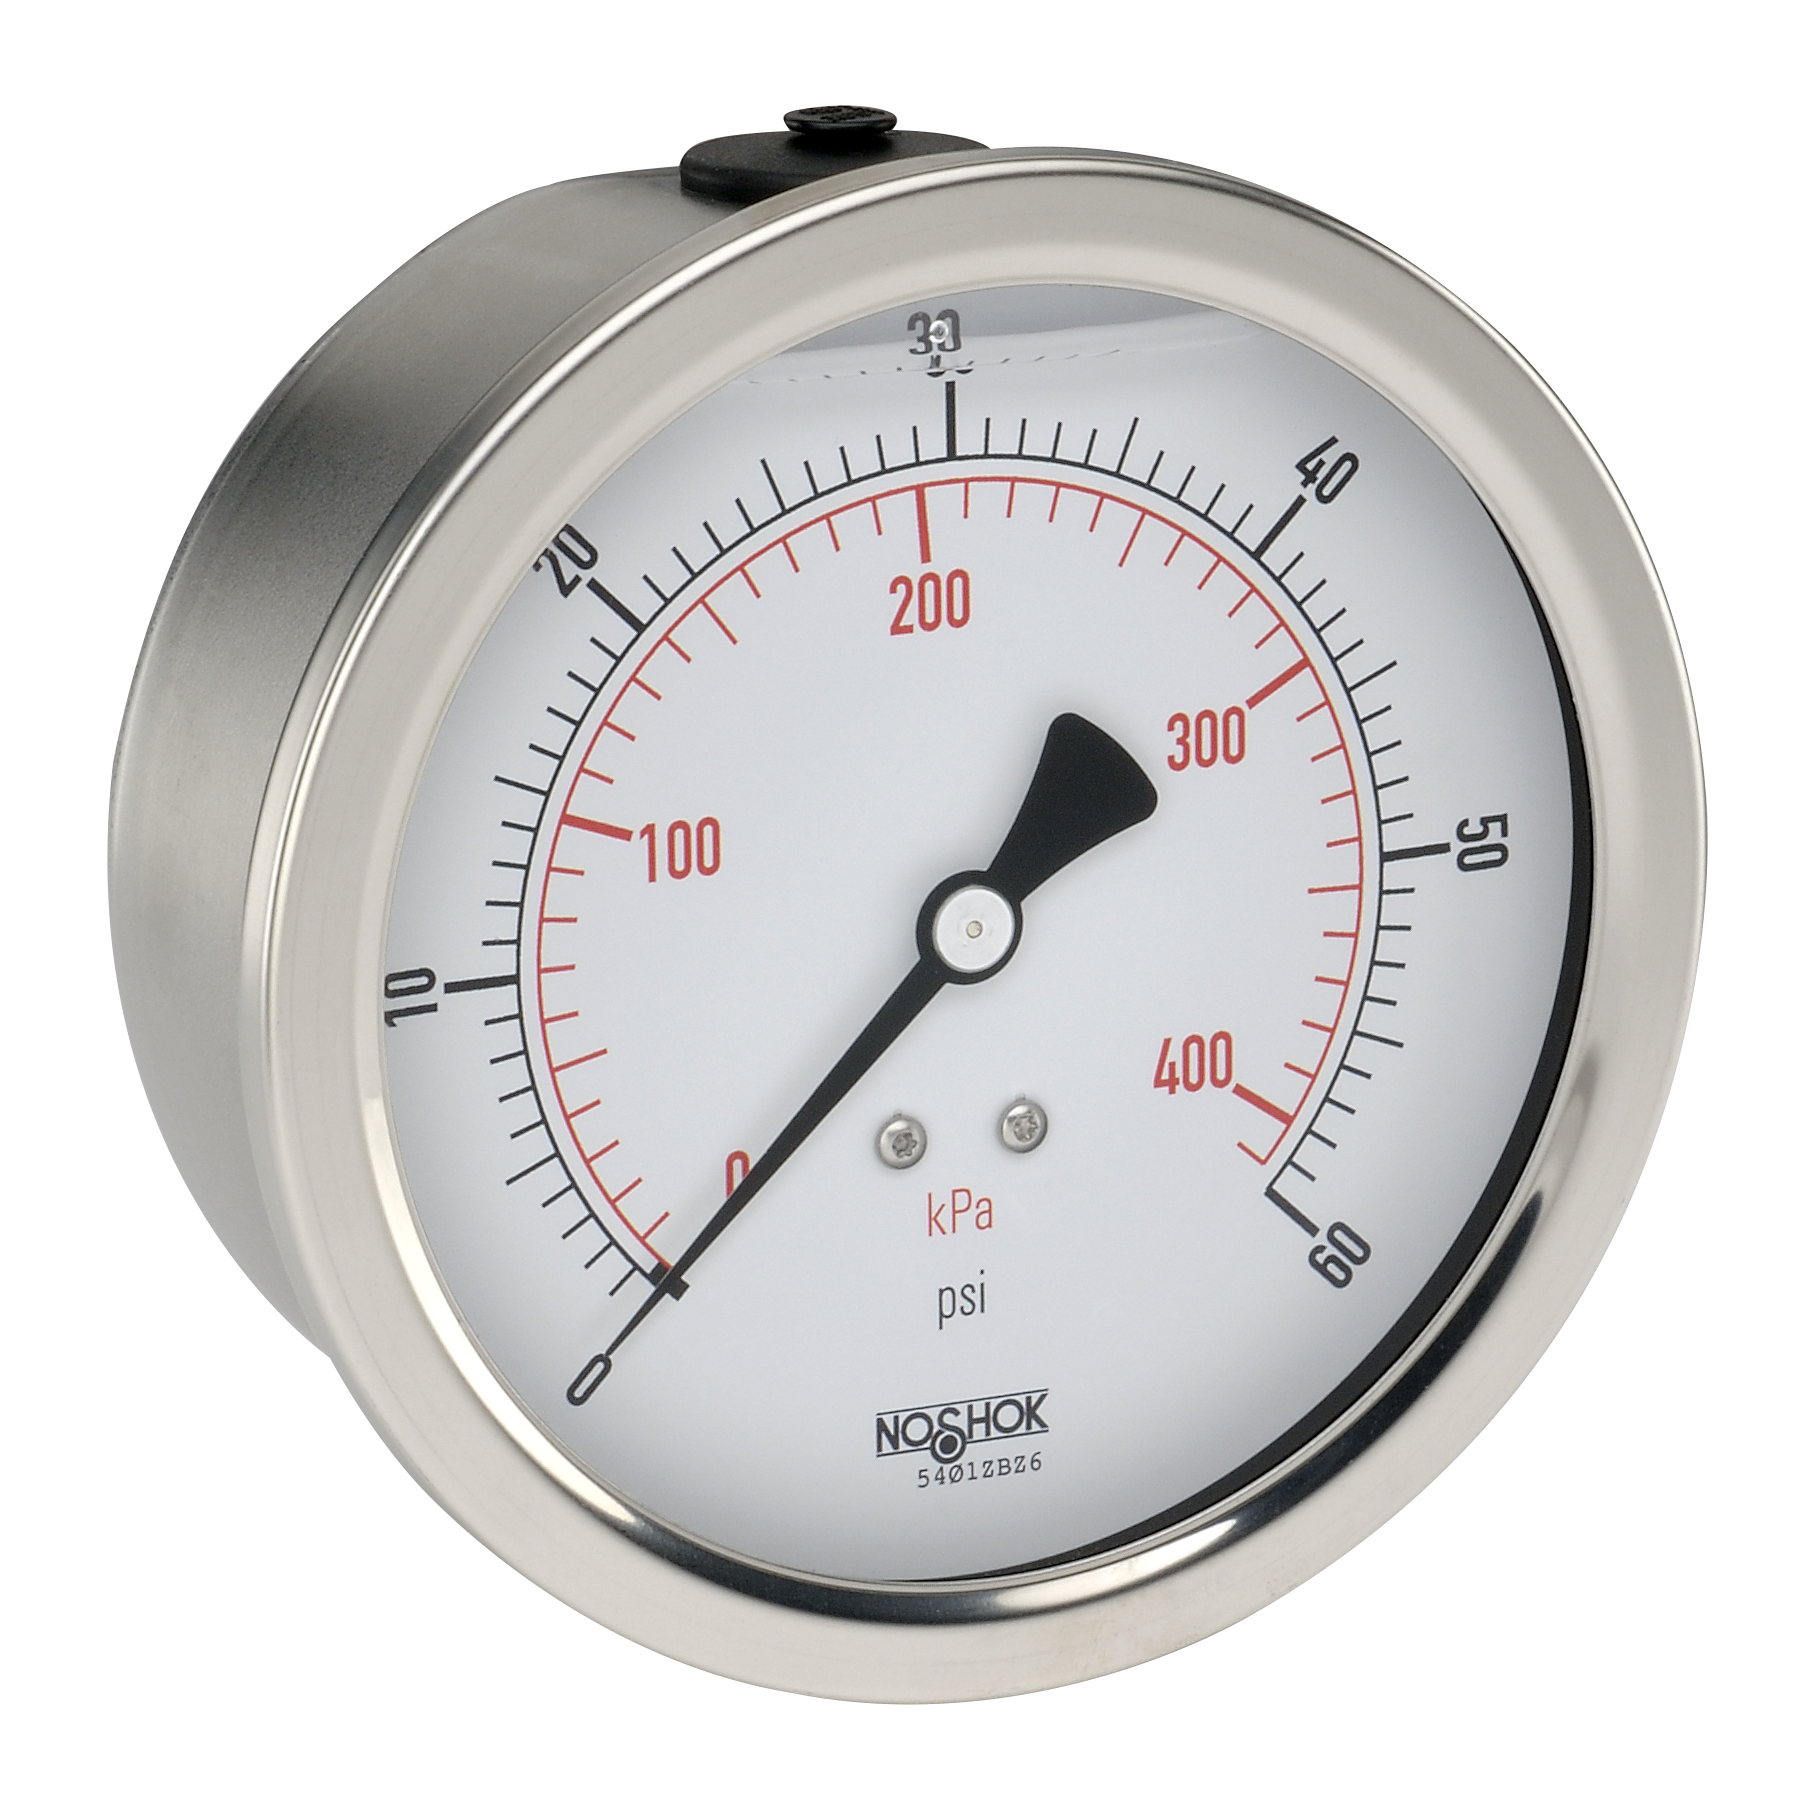 40-911-300-psi/bar 900 Series ABS and Stainless Steel Liquid Filled Pressure Gauges